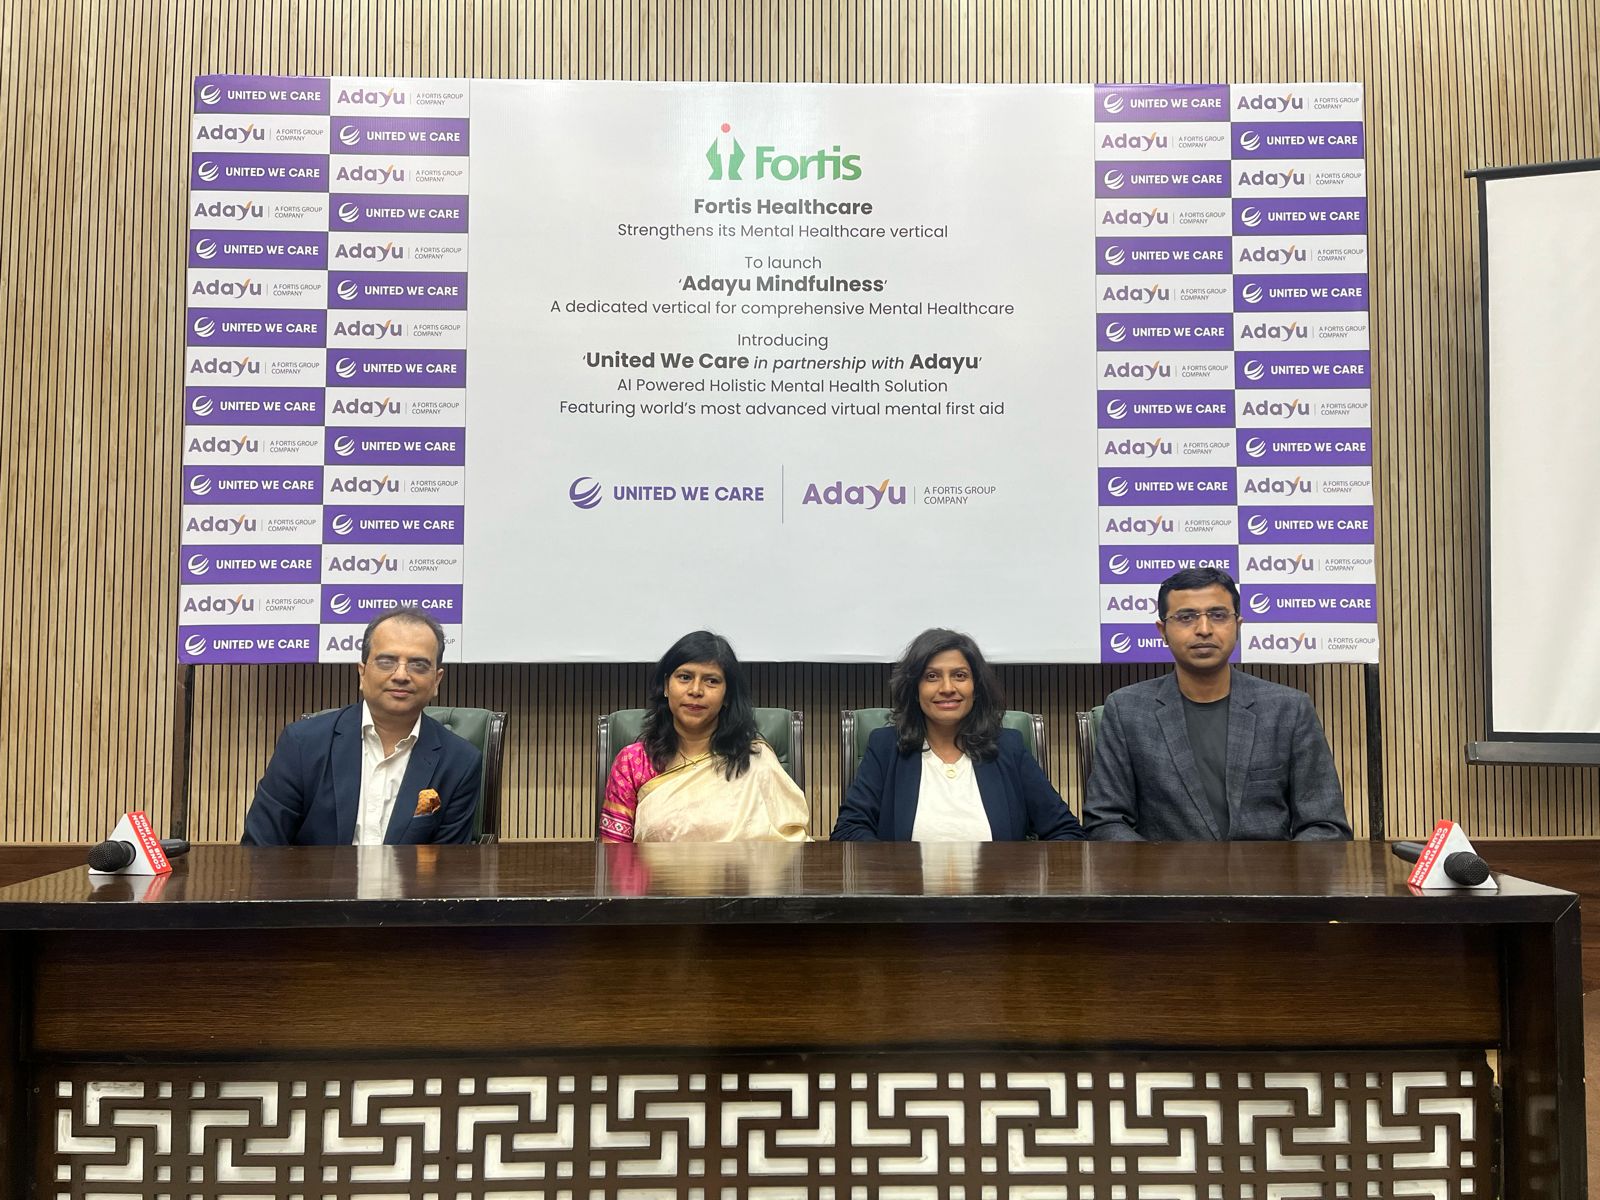 fortis-healthcare-expands-into-mental-health-field